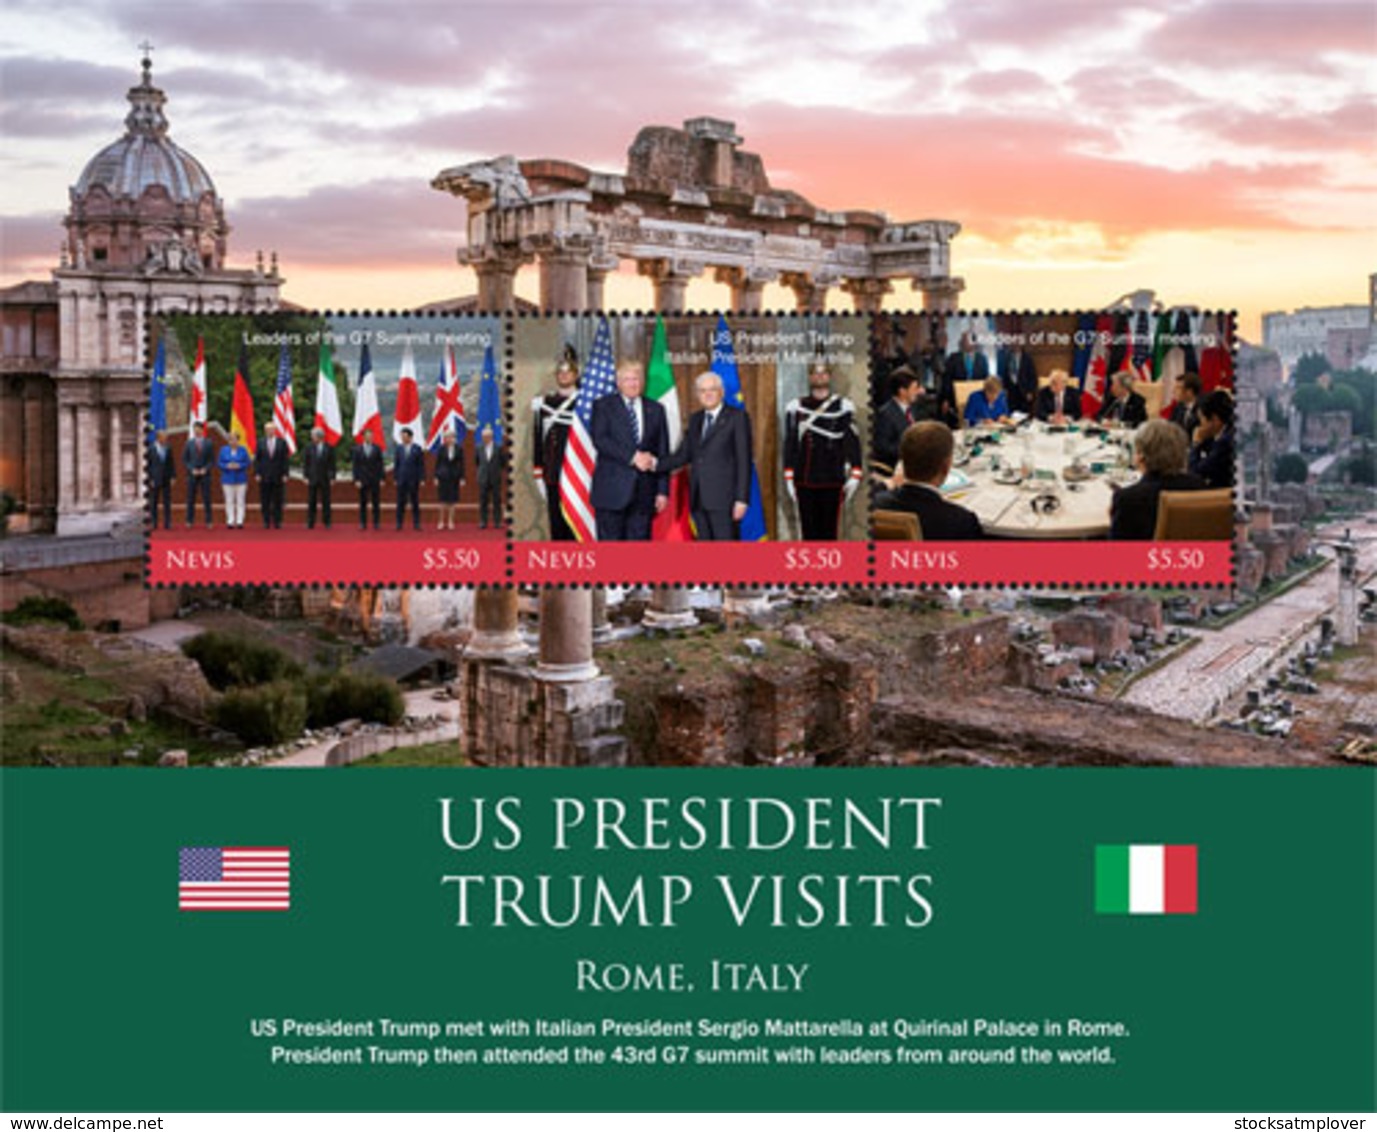 Nevis   2018   U.S. PRESIDENT TRUMP VISITS  ROME   I201901 - St.Kitts And Nevis ( 1983-...)